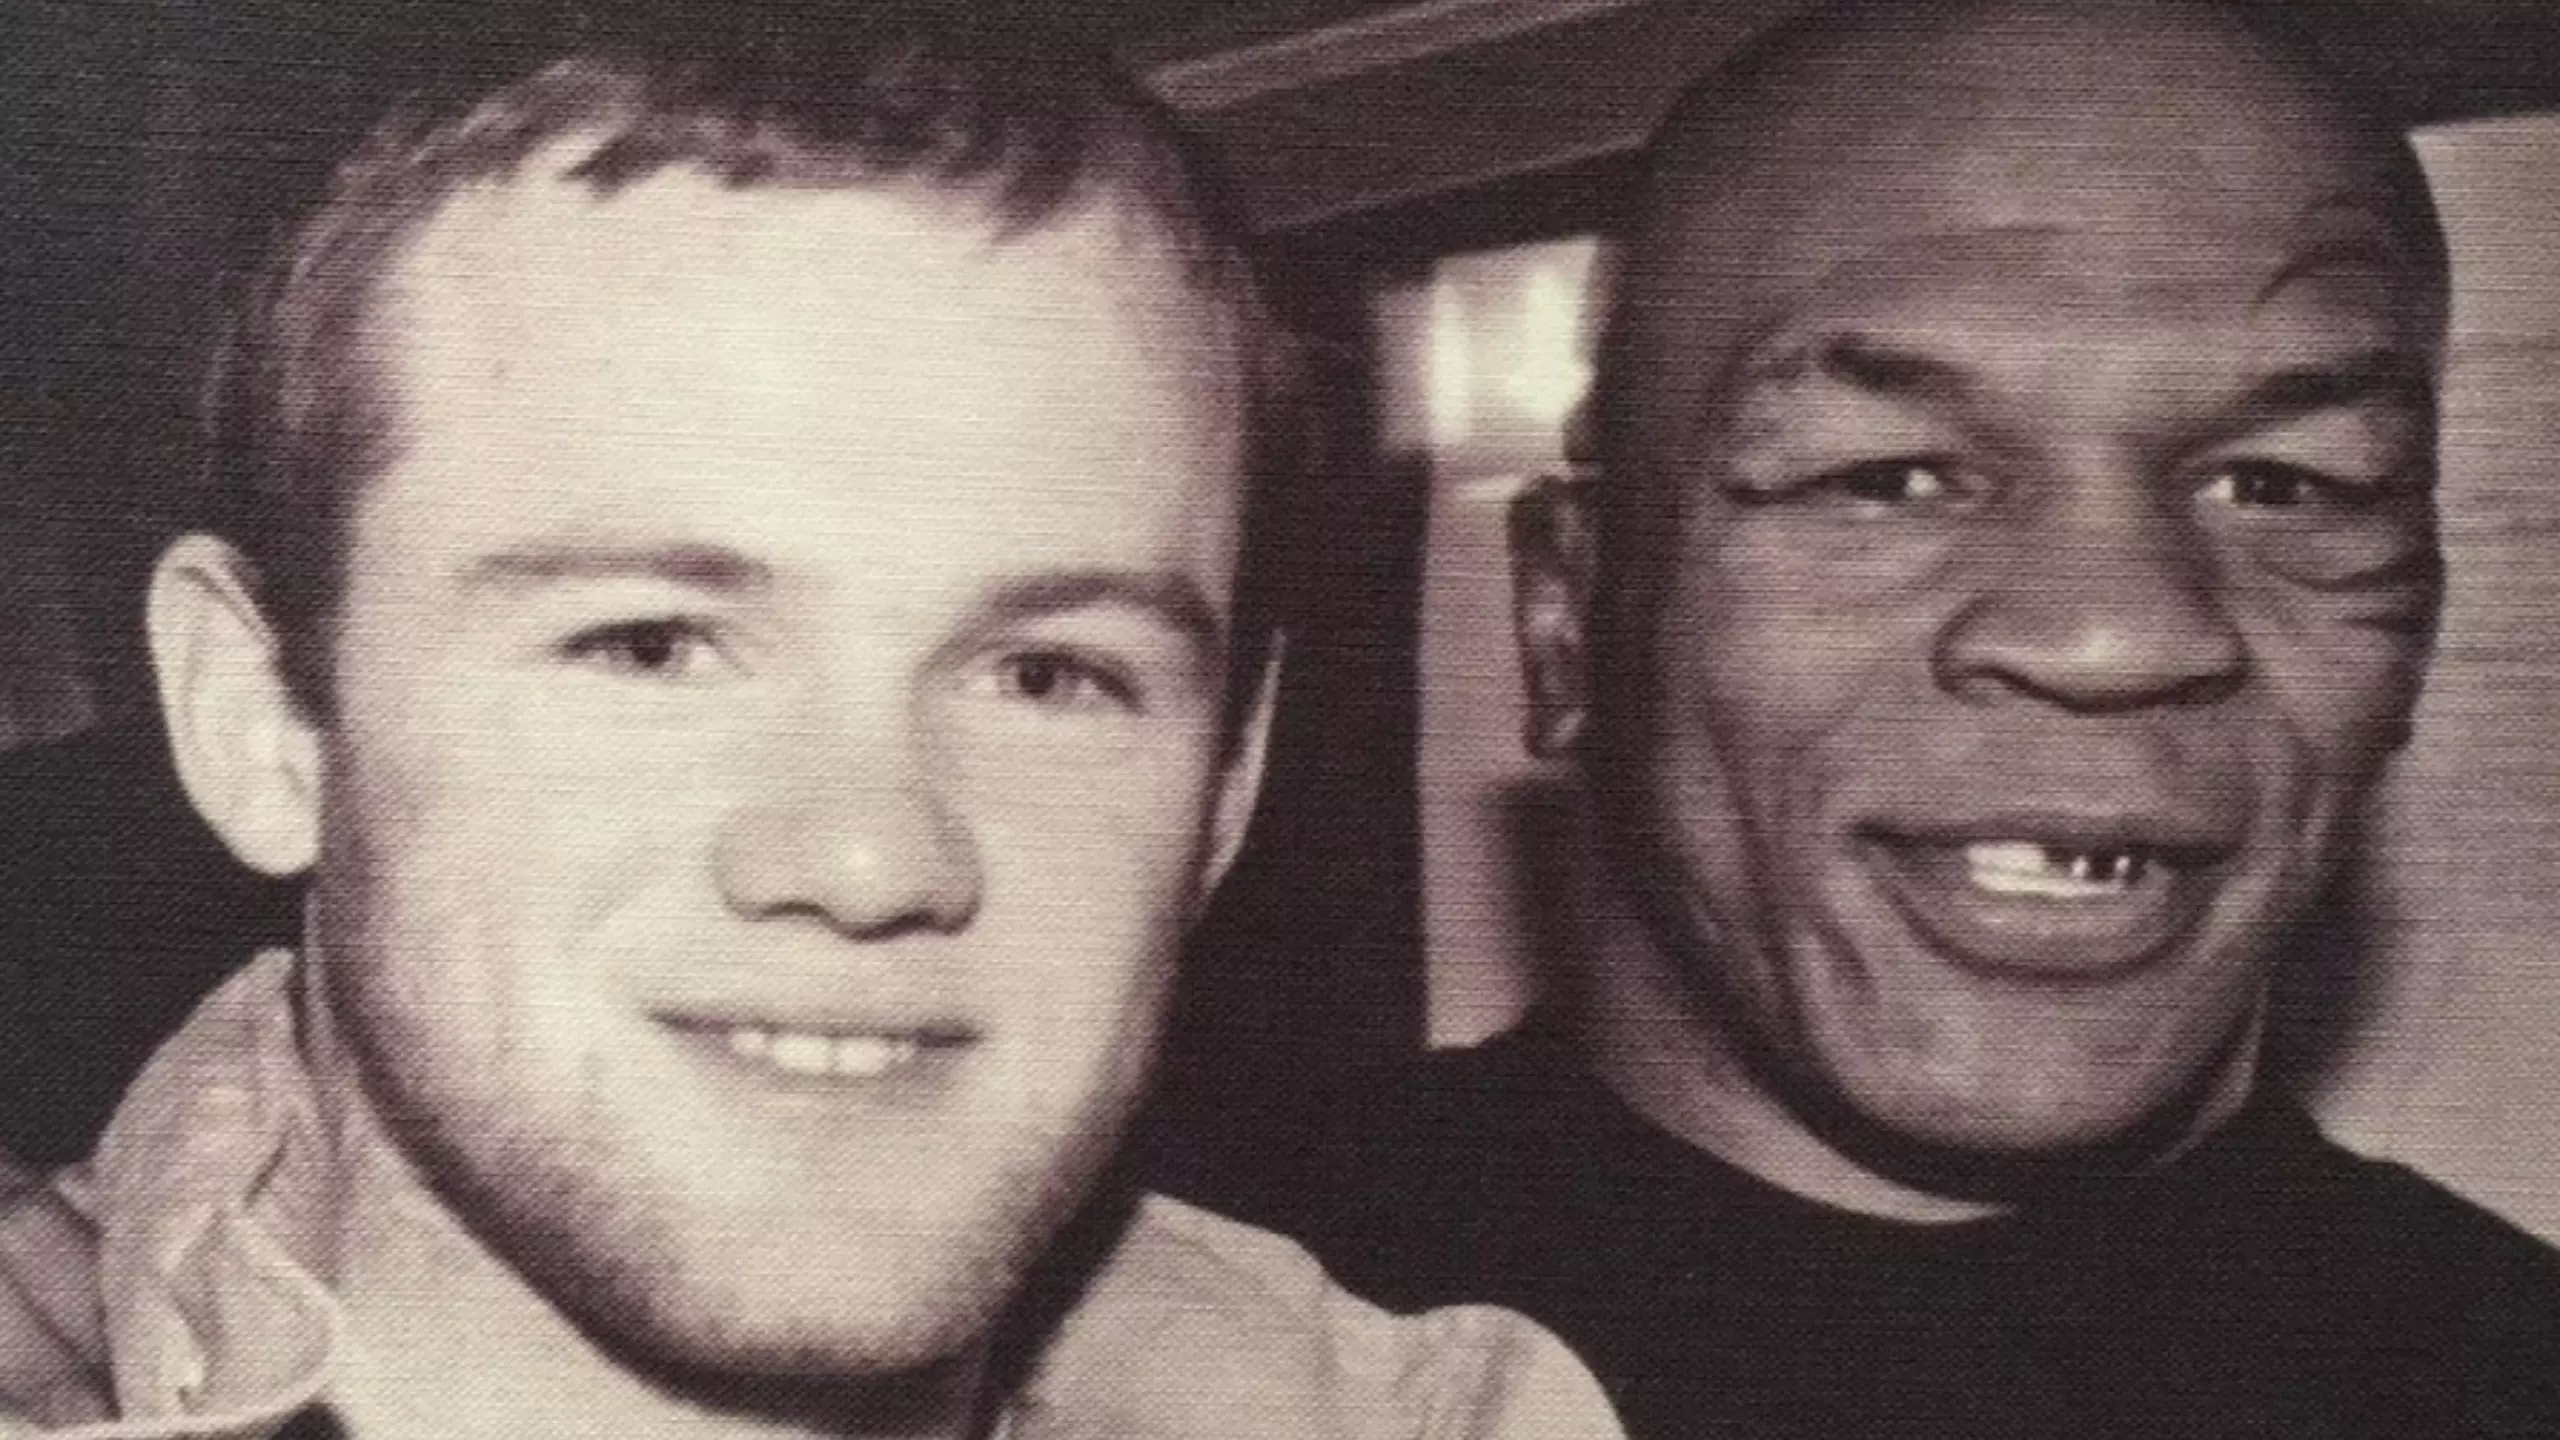 Mike Tyson Once Requested To Meet Wayne Rooney And He Gave Him Some Vital Advice